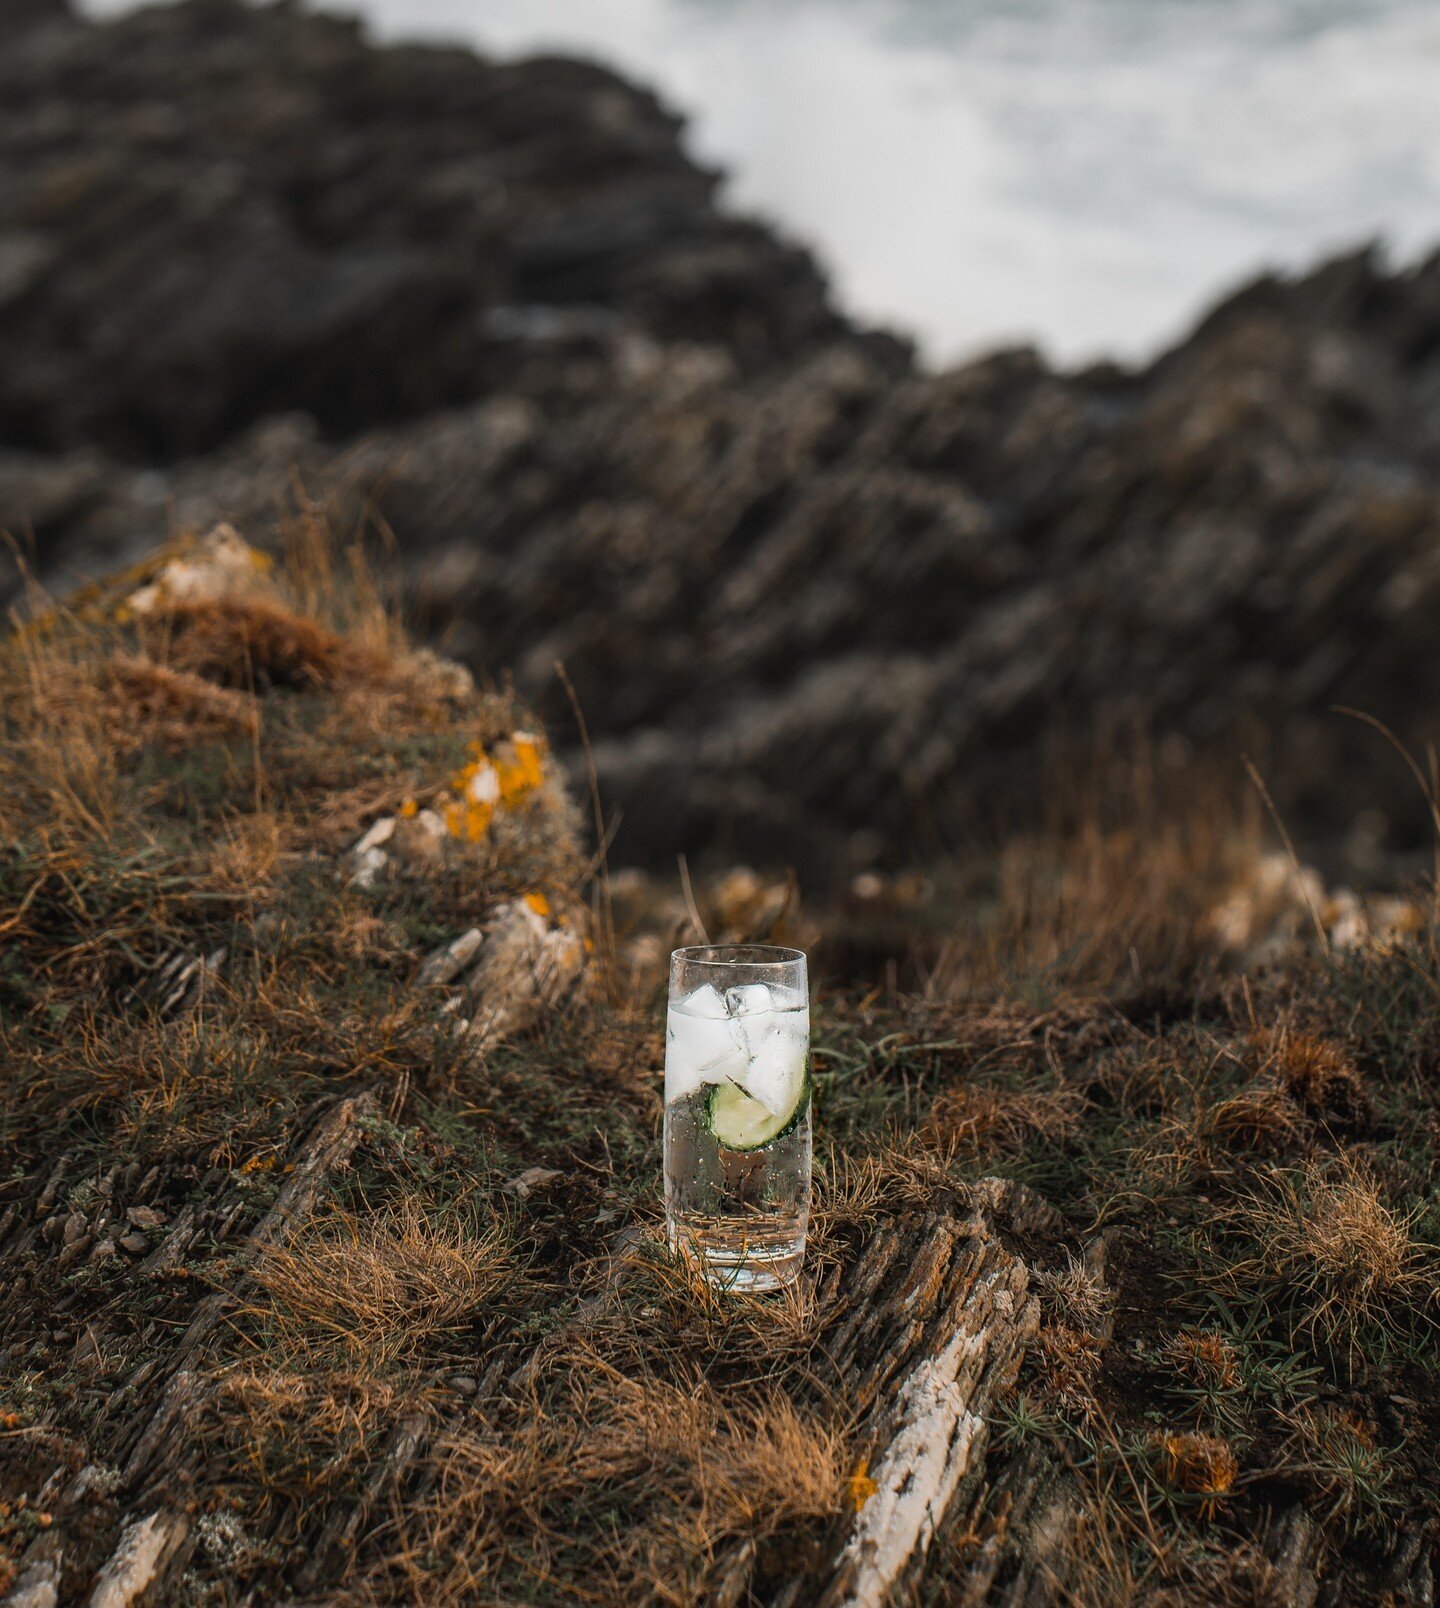 Ready for the weekend?⁠
⁠
I think our multi-award winning original Lantic Gin is best enjoyed over ice with a Mediterranean tonic and a slice of cucumber 🥒⁠
⁠
How do you enjoy your Lantic Gin?⁠
⁠
⁠
#lanticgin #wildsideofgin #coastalwalks #fridaygin 